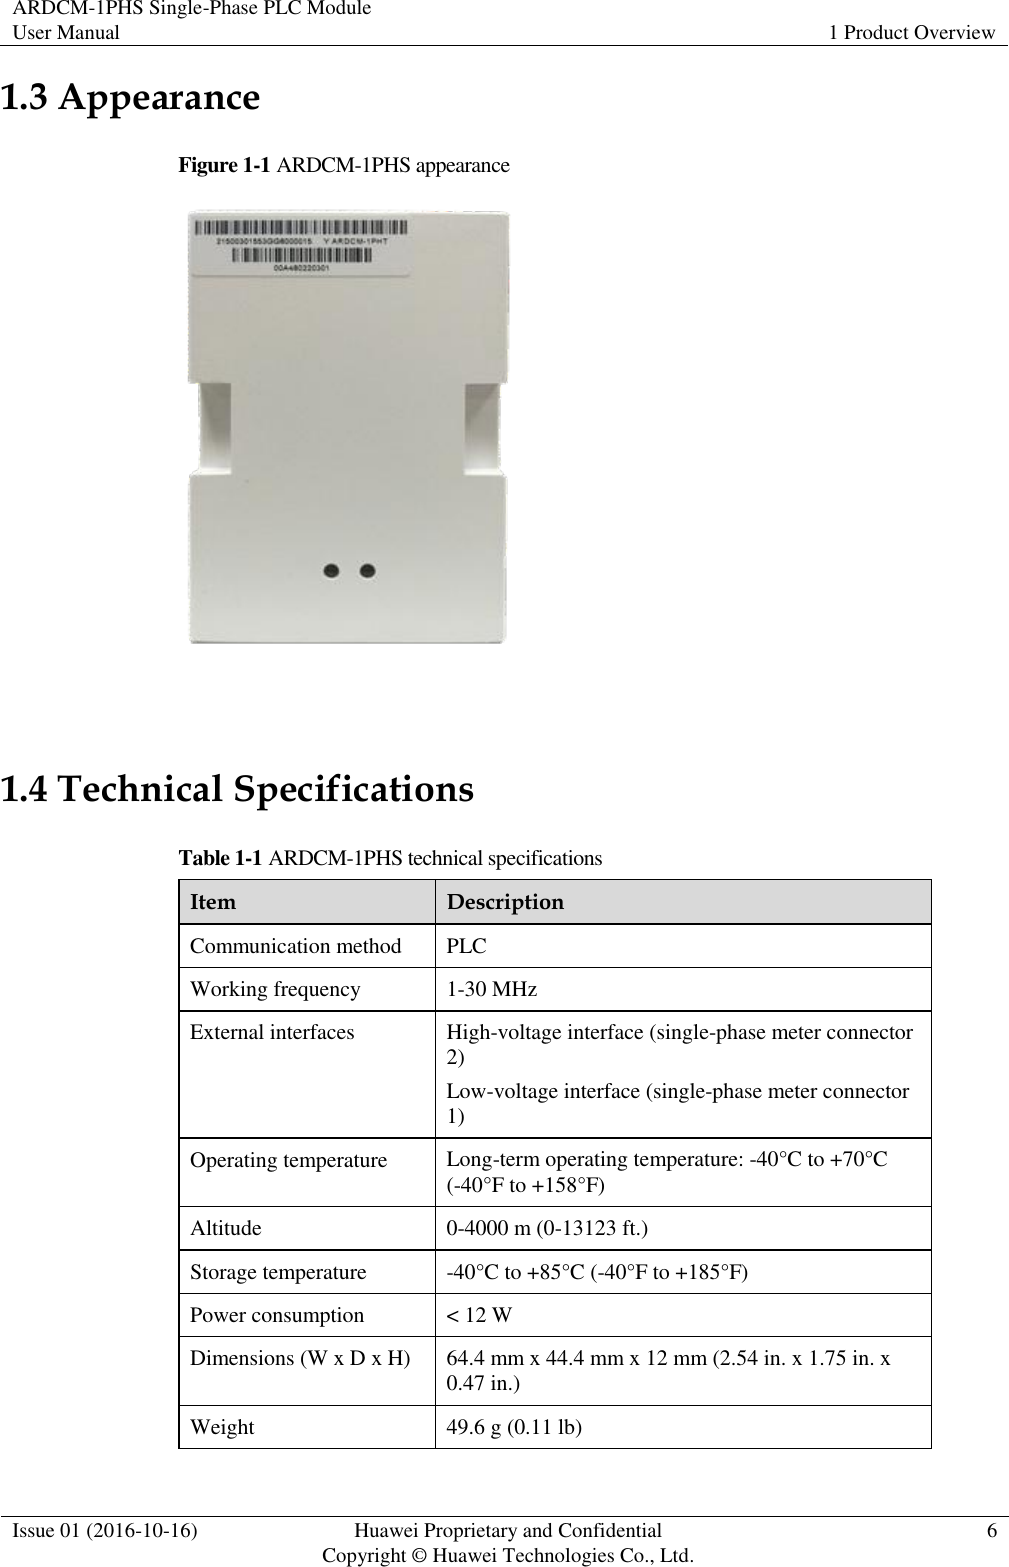 ARDCM-1PHS Single-Phase PLC Module User Manual 1 Product Overview  Issue 01 (2016-10-16) Huawei Proprietary and Confidential Copyright © Huawei Technologies Co., Ltd. 6  1.3 Appearance Figure 1-1 ARDCM-1PHS appearance   1.4 Technical Specifications Table 1-1 ARDCM-1PHS technical specifications Item Description Communication method PLC Working frequency 1-30 MHz External interfaces High-voltage interface (single-phase meter connector 2) Low-voltage interface (single-phase meter connector 1) Operating temperature Long-term operating temperature: -40°C to +70°C (-40°F to +158°F) Altitude 0-4000 m (0-13123 ft.) Storage temperature -40°C  to +85°C  (-40°F to +185°F ) Power consumption &lt; 12 W Dimensions (W x D x H) 64.4 mm x 44.4 mm x 12 mm (2.54 in. x 1.75 in. x 0.47 in.) Weight 49.6 g (0.11 lb) 